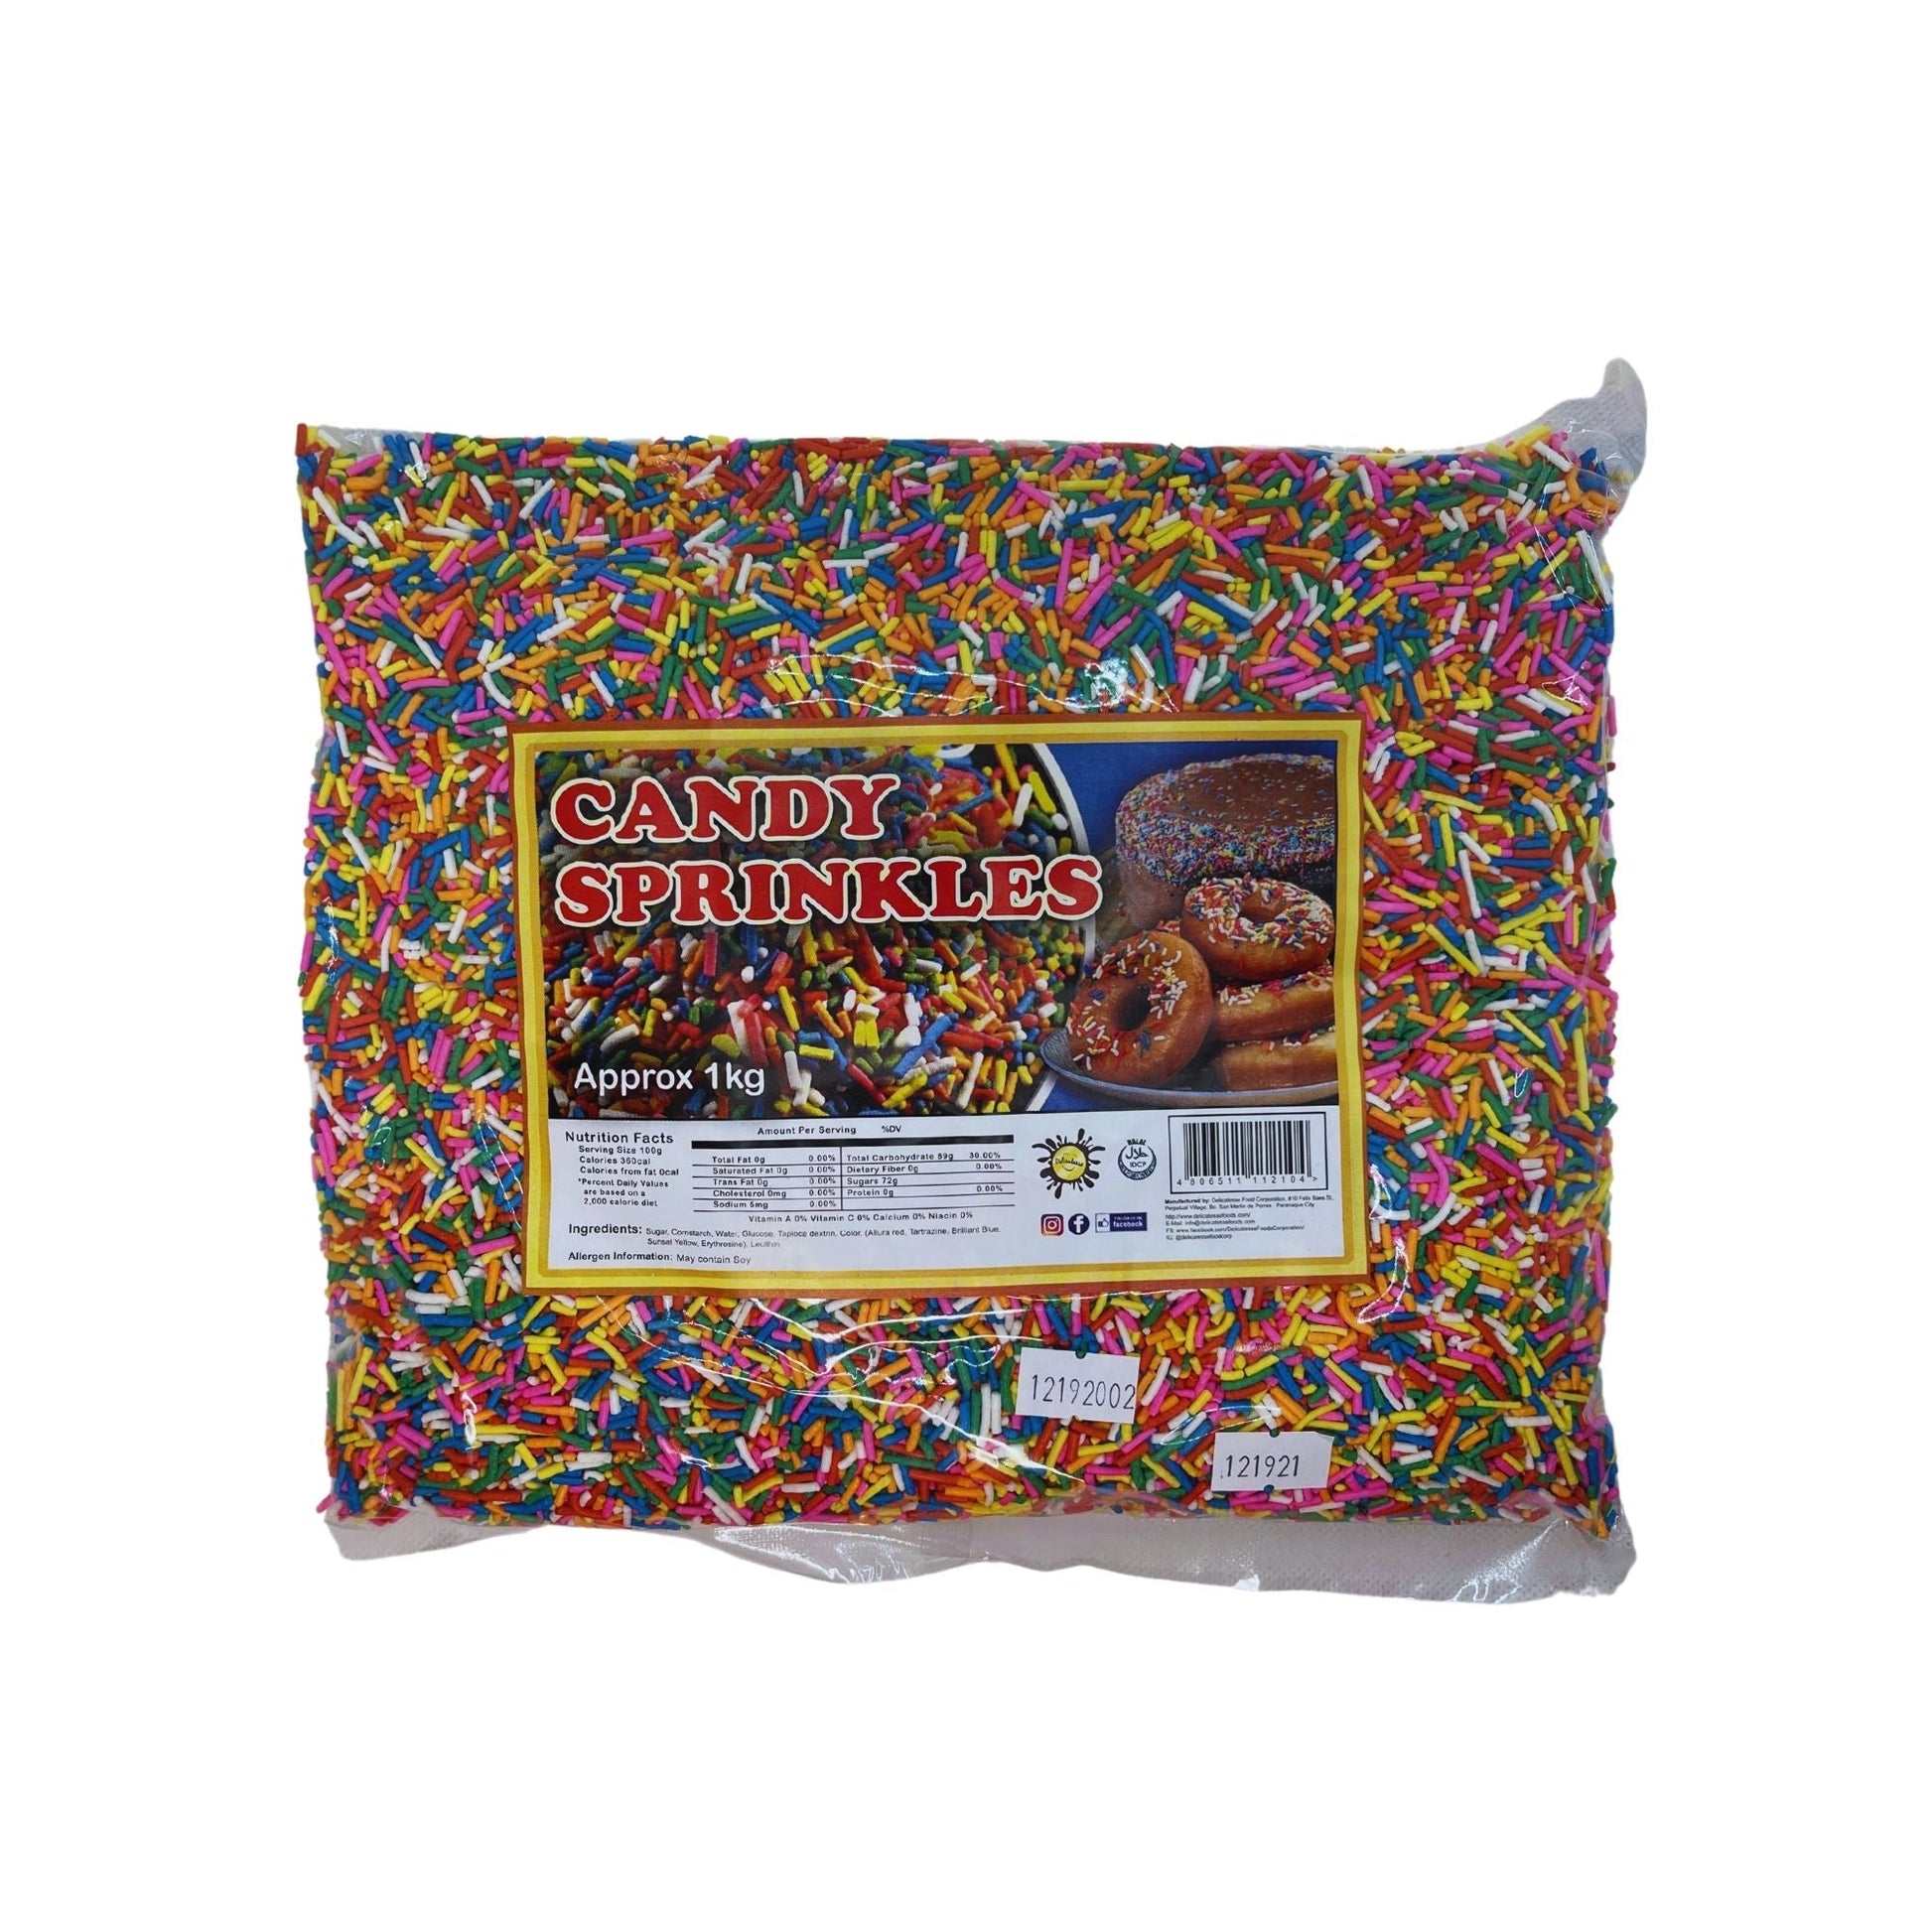 Delicatesse Vermicelli Assorted Candy Sprinkles 1kg - Kreme City Supplies